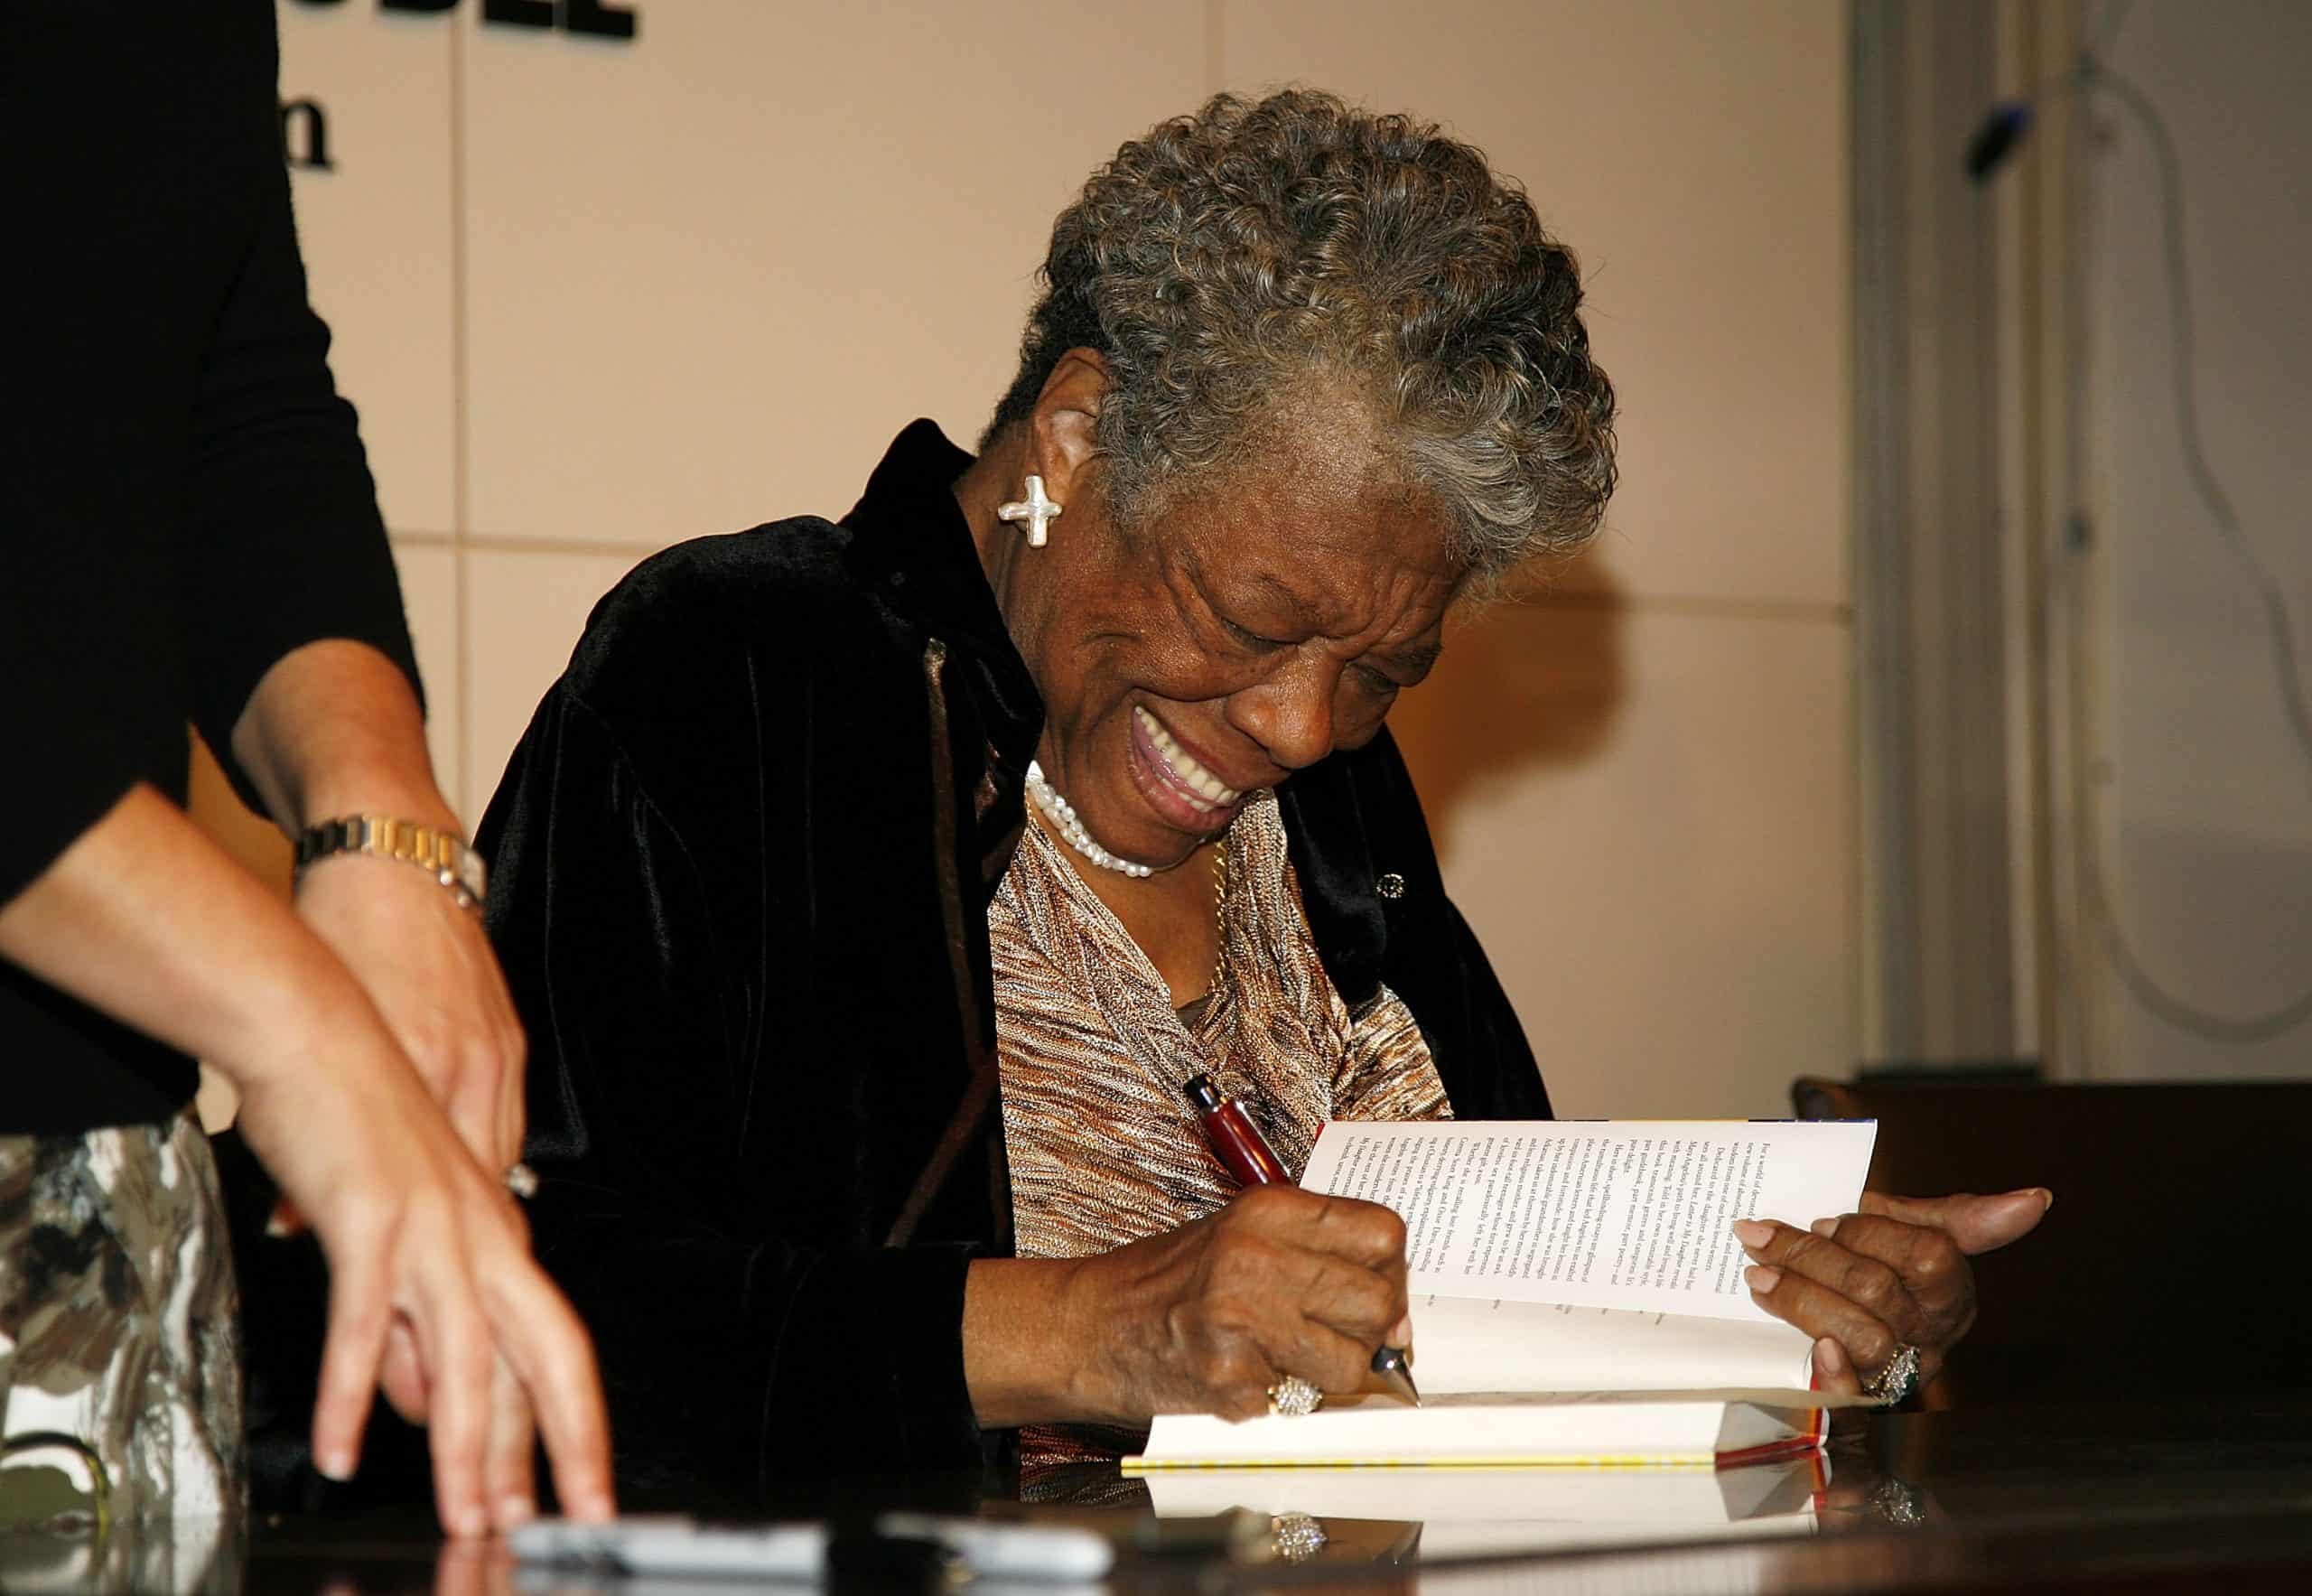 Maya Angelou Signs Copies Of "Maya Angelou: Letter To My Daughter"